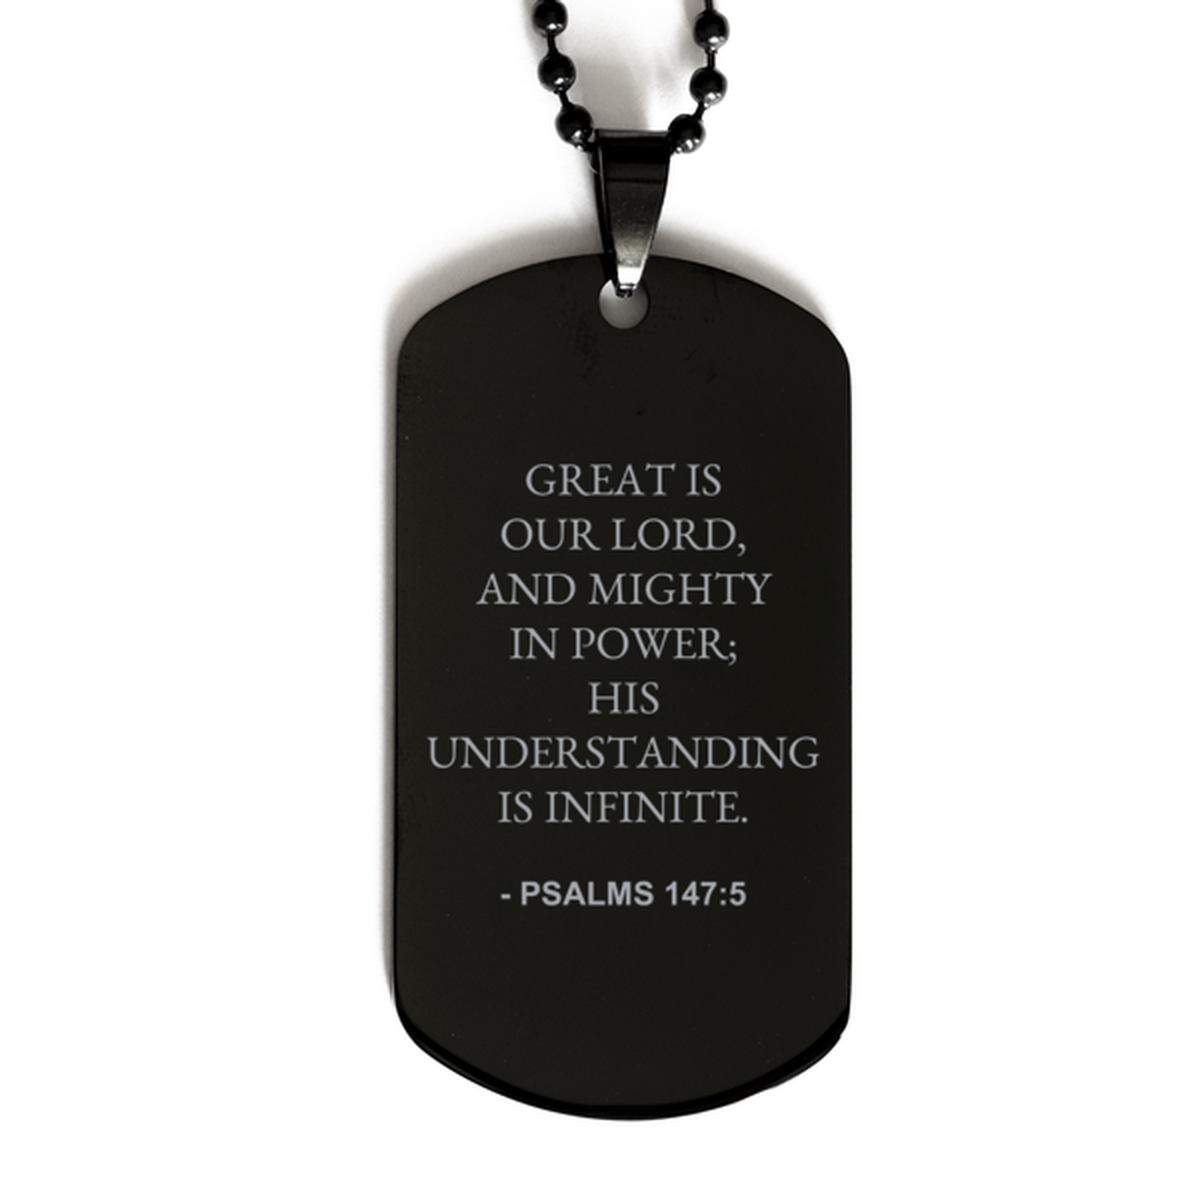 Bible Verse Black Dog Tag, Psalms 147:5 Great Is Our Lord, And Mighty In Power; His, Christian Inspirational Necklace Gifts For Men Women